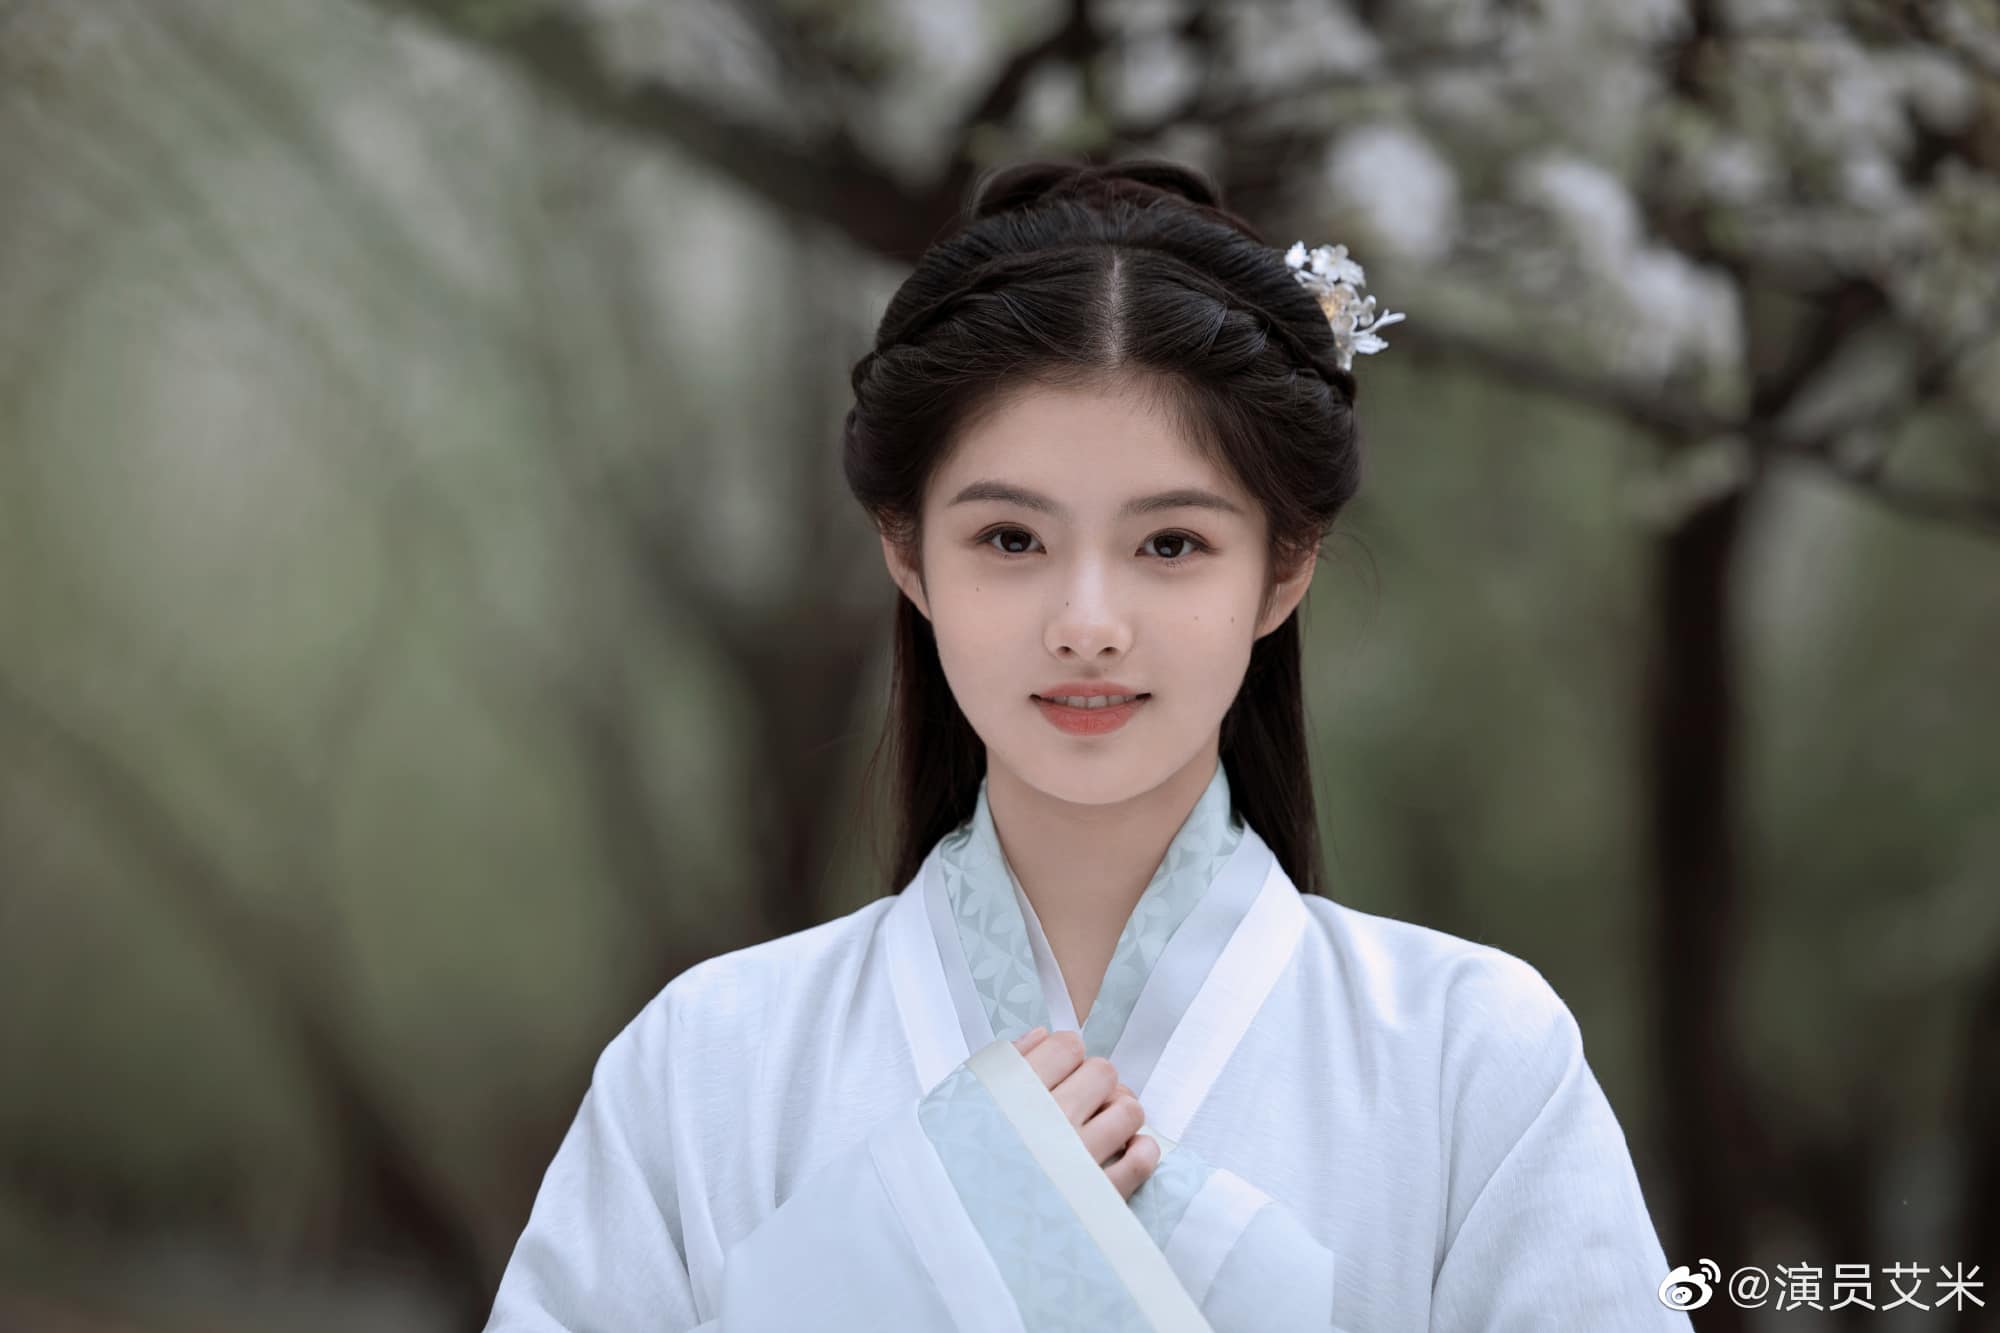 Girls 14, 15 years old have been praised as " billion-billion-dollar fairy"  compared to Liu Yifei - 6